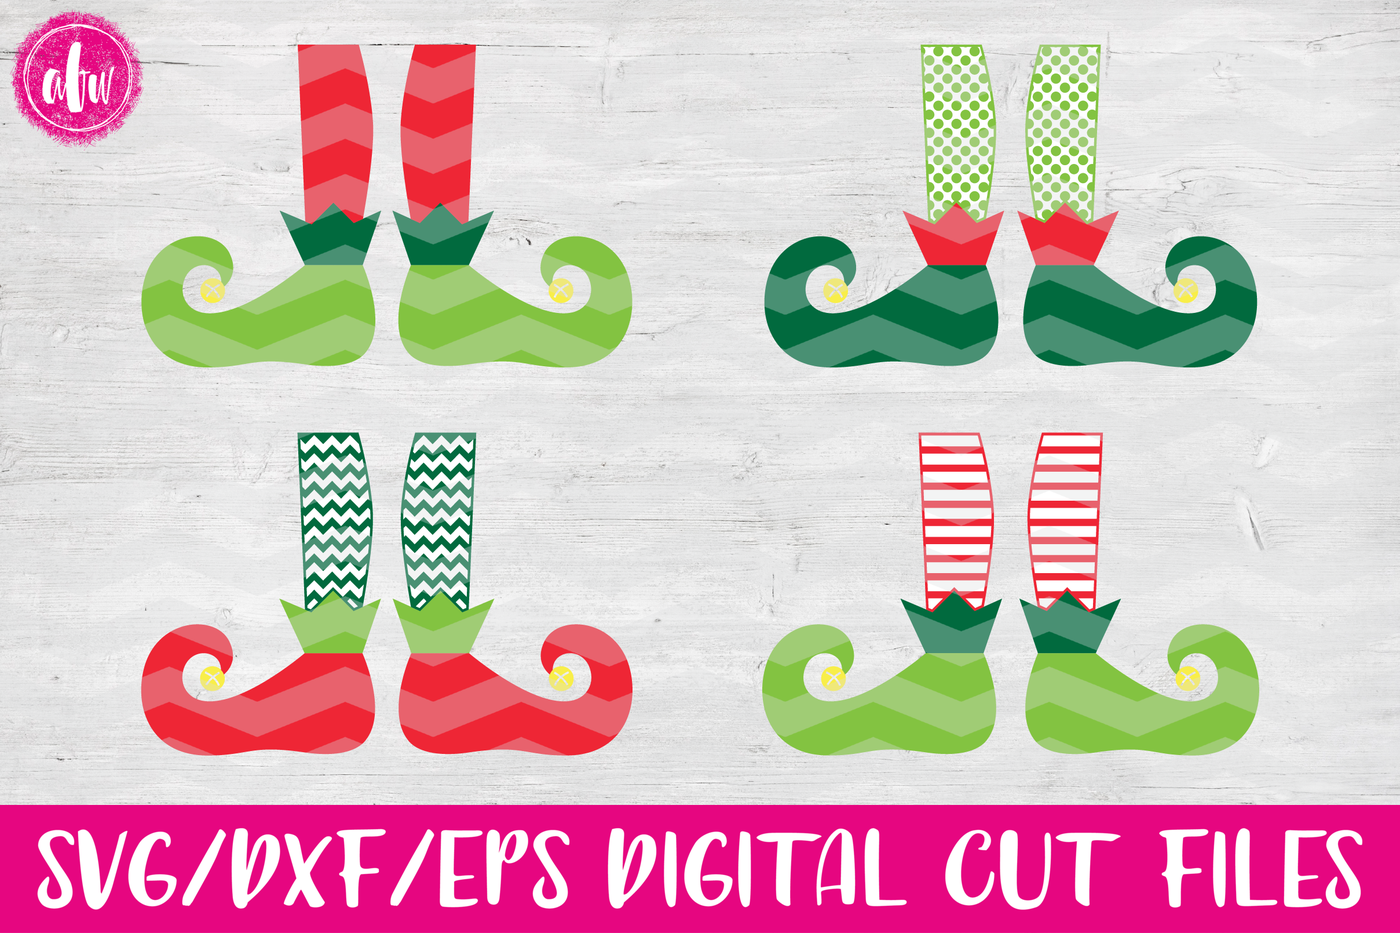 Download Elf Legs - SVG, DXF, EPS Cut Files By AFW Designs | TheHungryJPEG.com